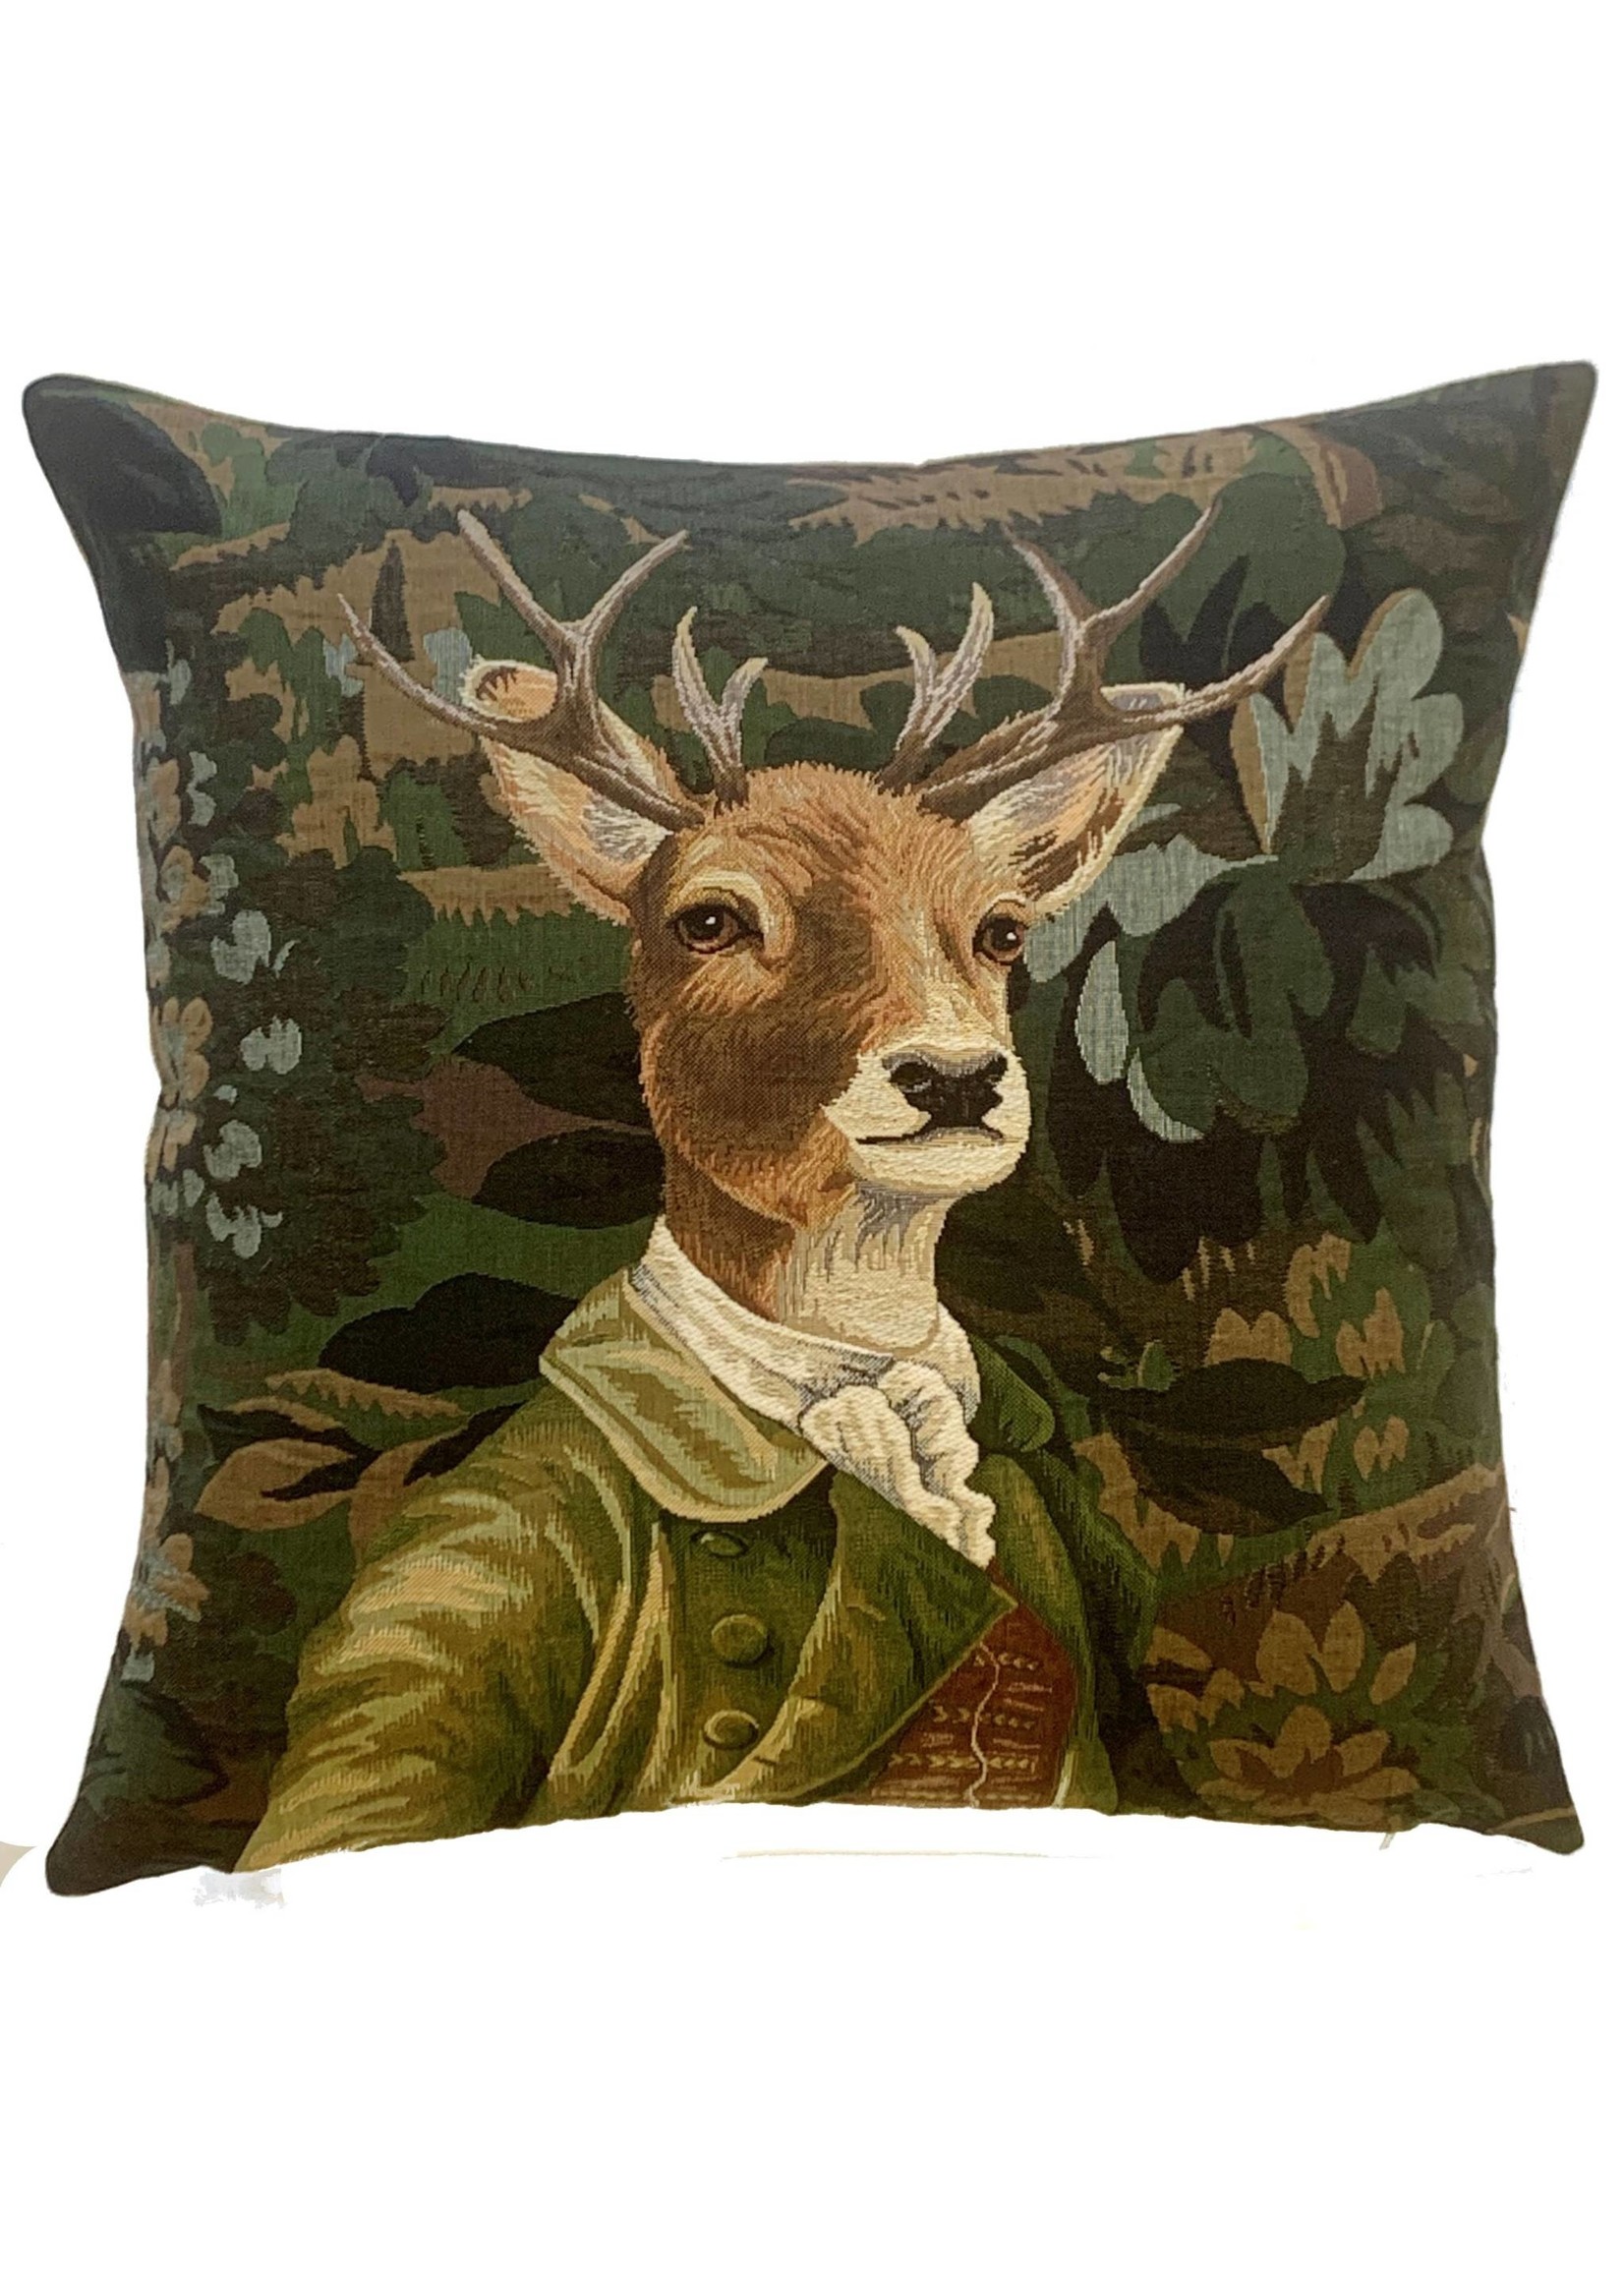 Pillow with Insert - Stag with Green Jacket